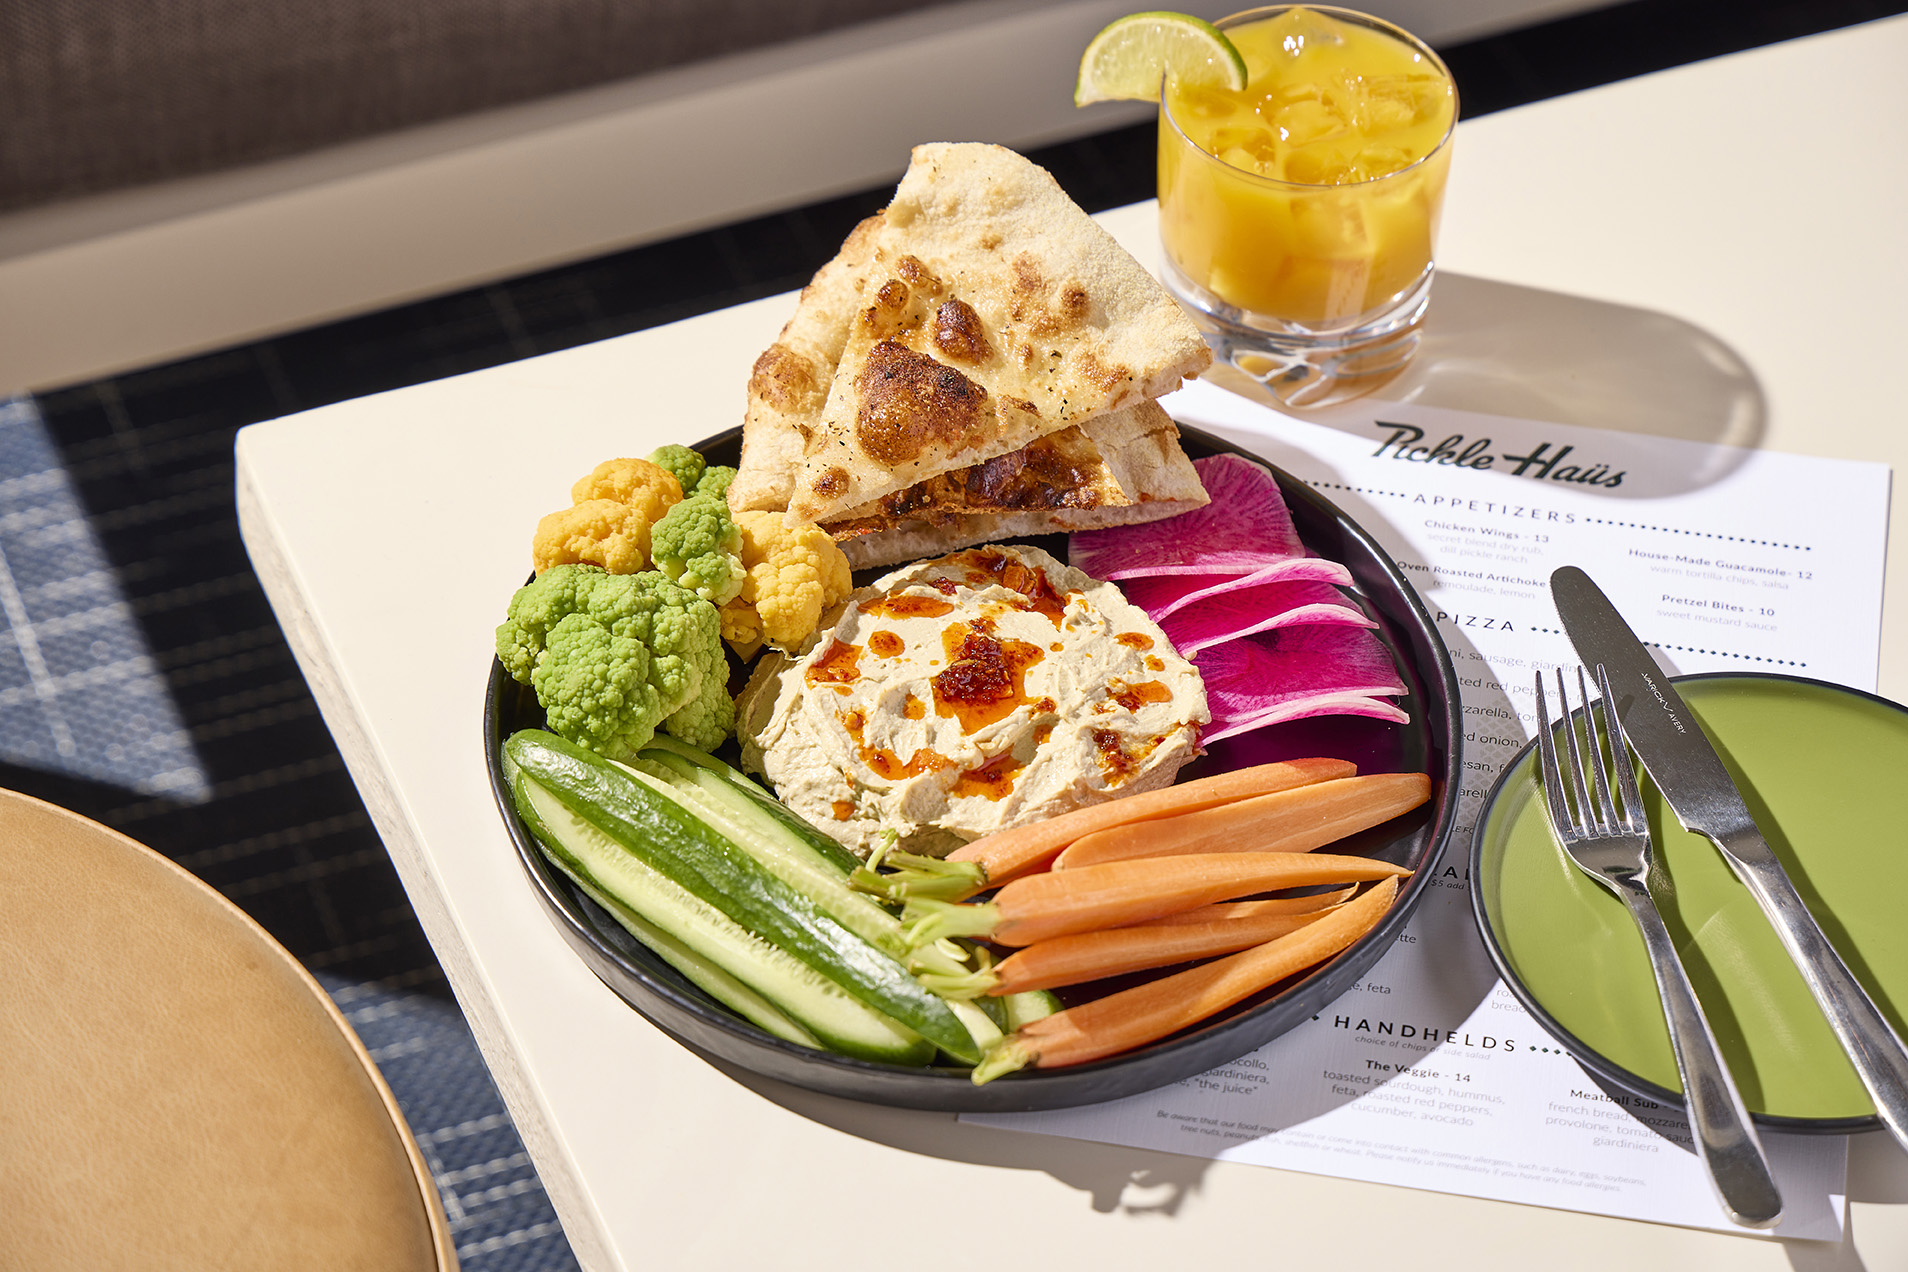 hummus platter with bread and vegetables on table with mixed drink and menu